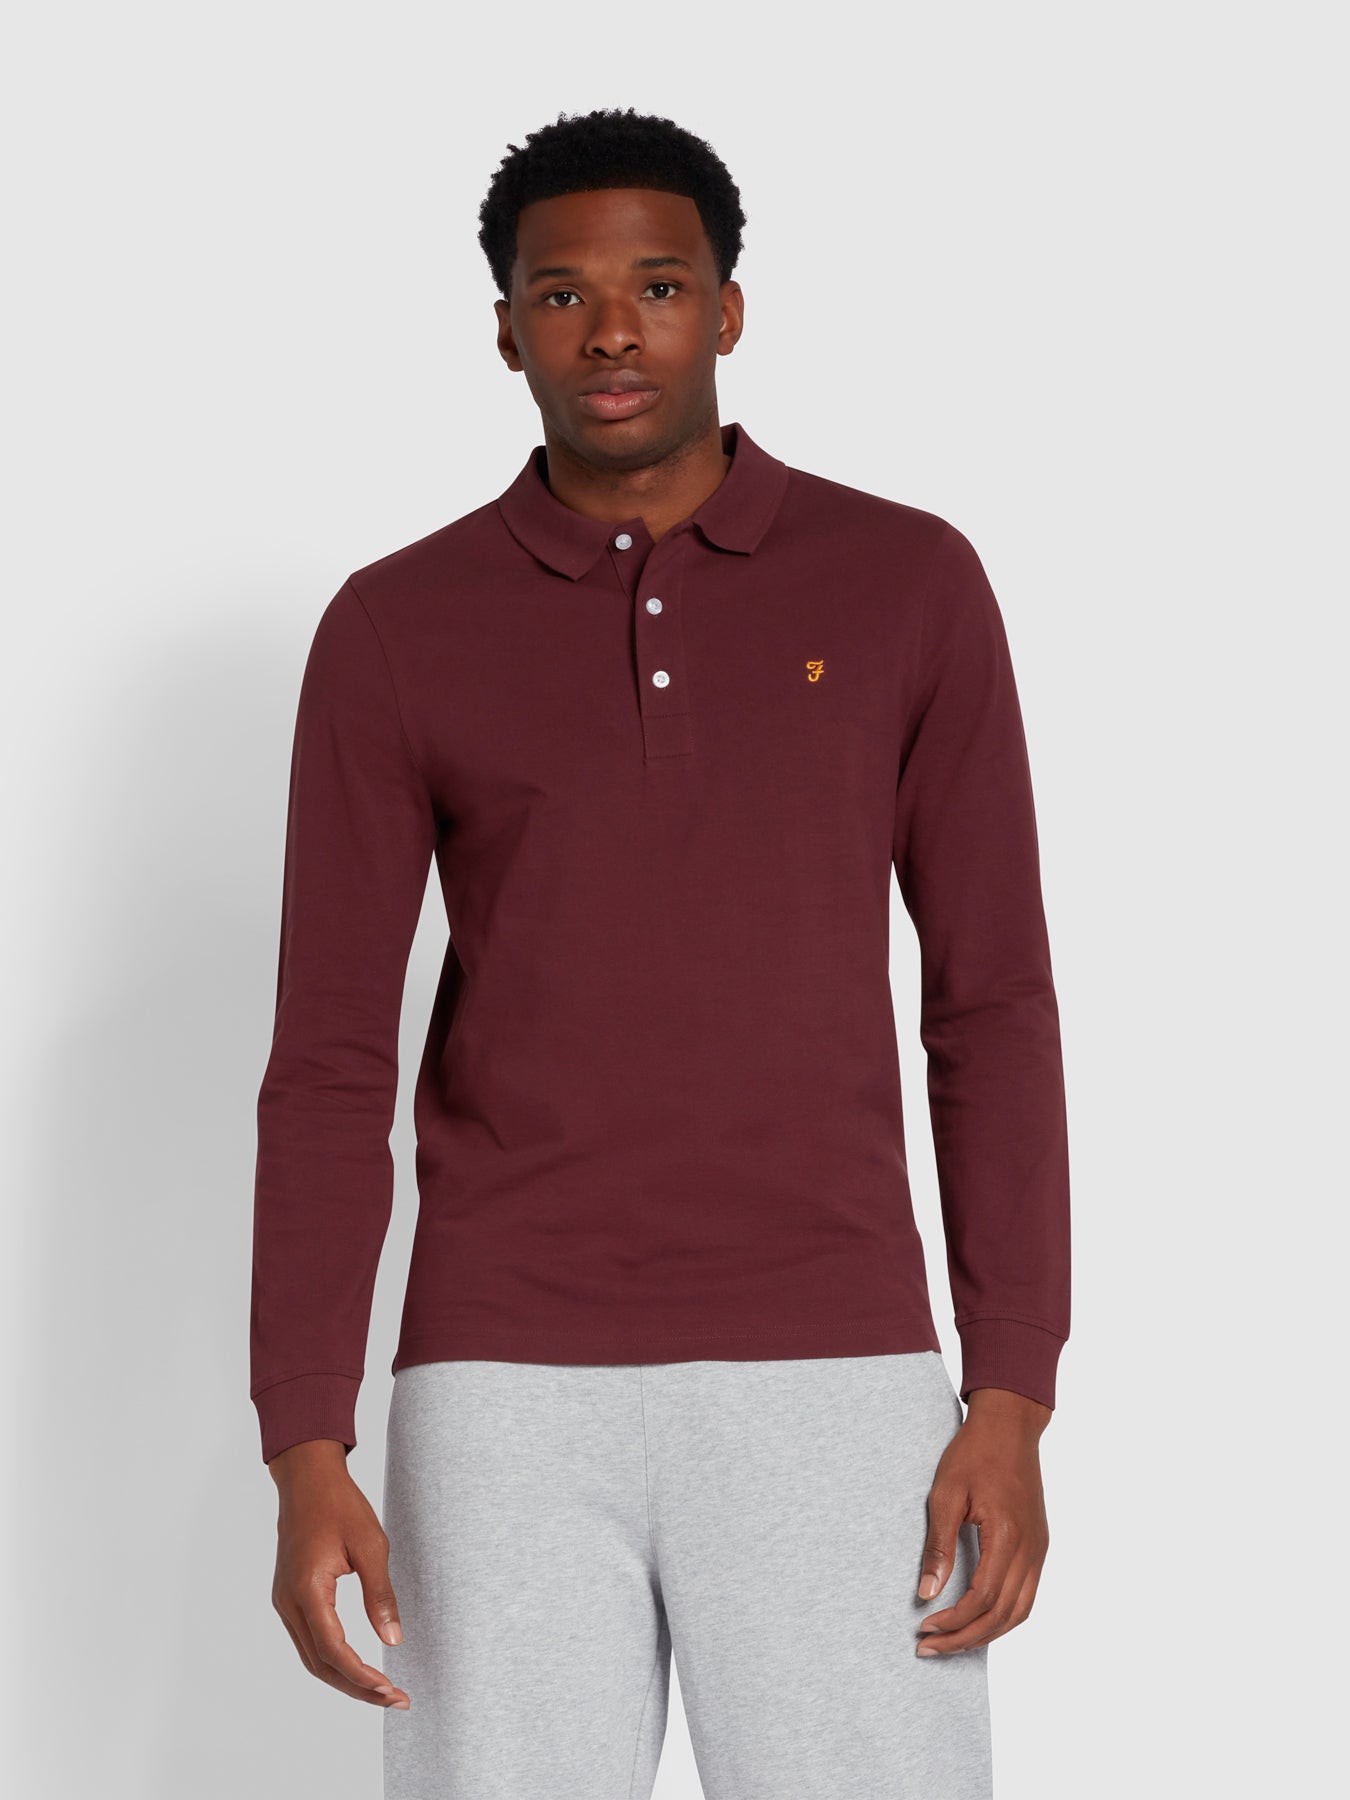 View Haslam Slim Fit Organic Cotton Polo Shirt In Farah Red information